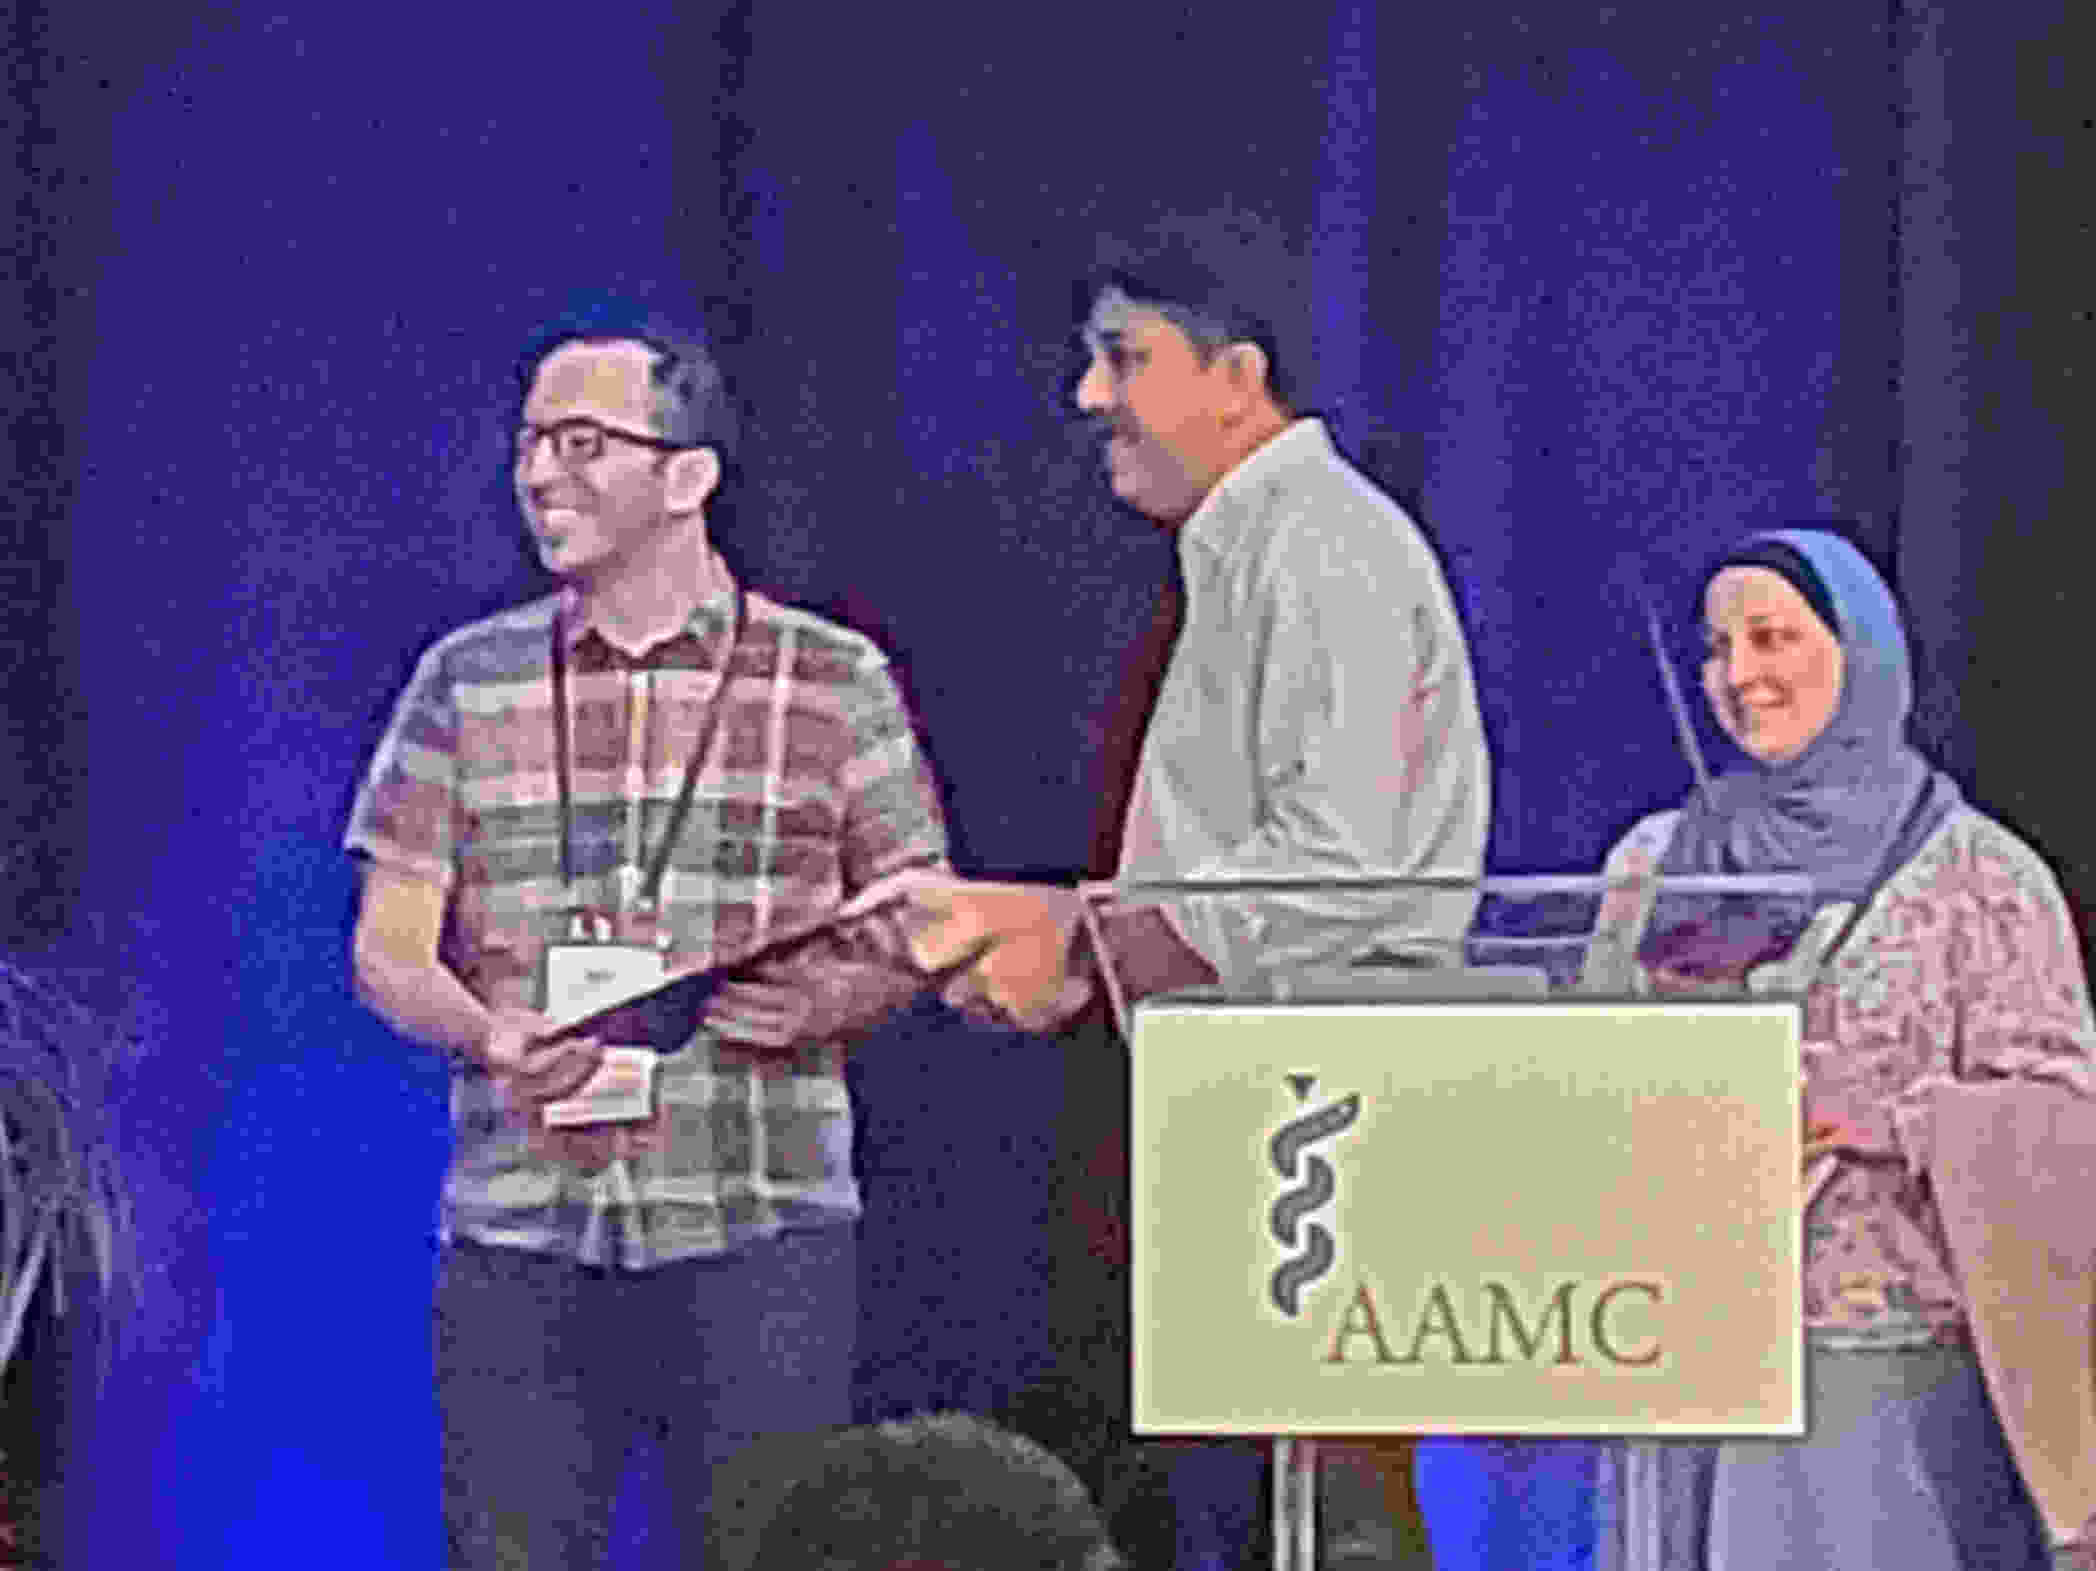 iCAP Poster Wins "Best in Class" at AAMC Conference